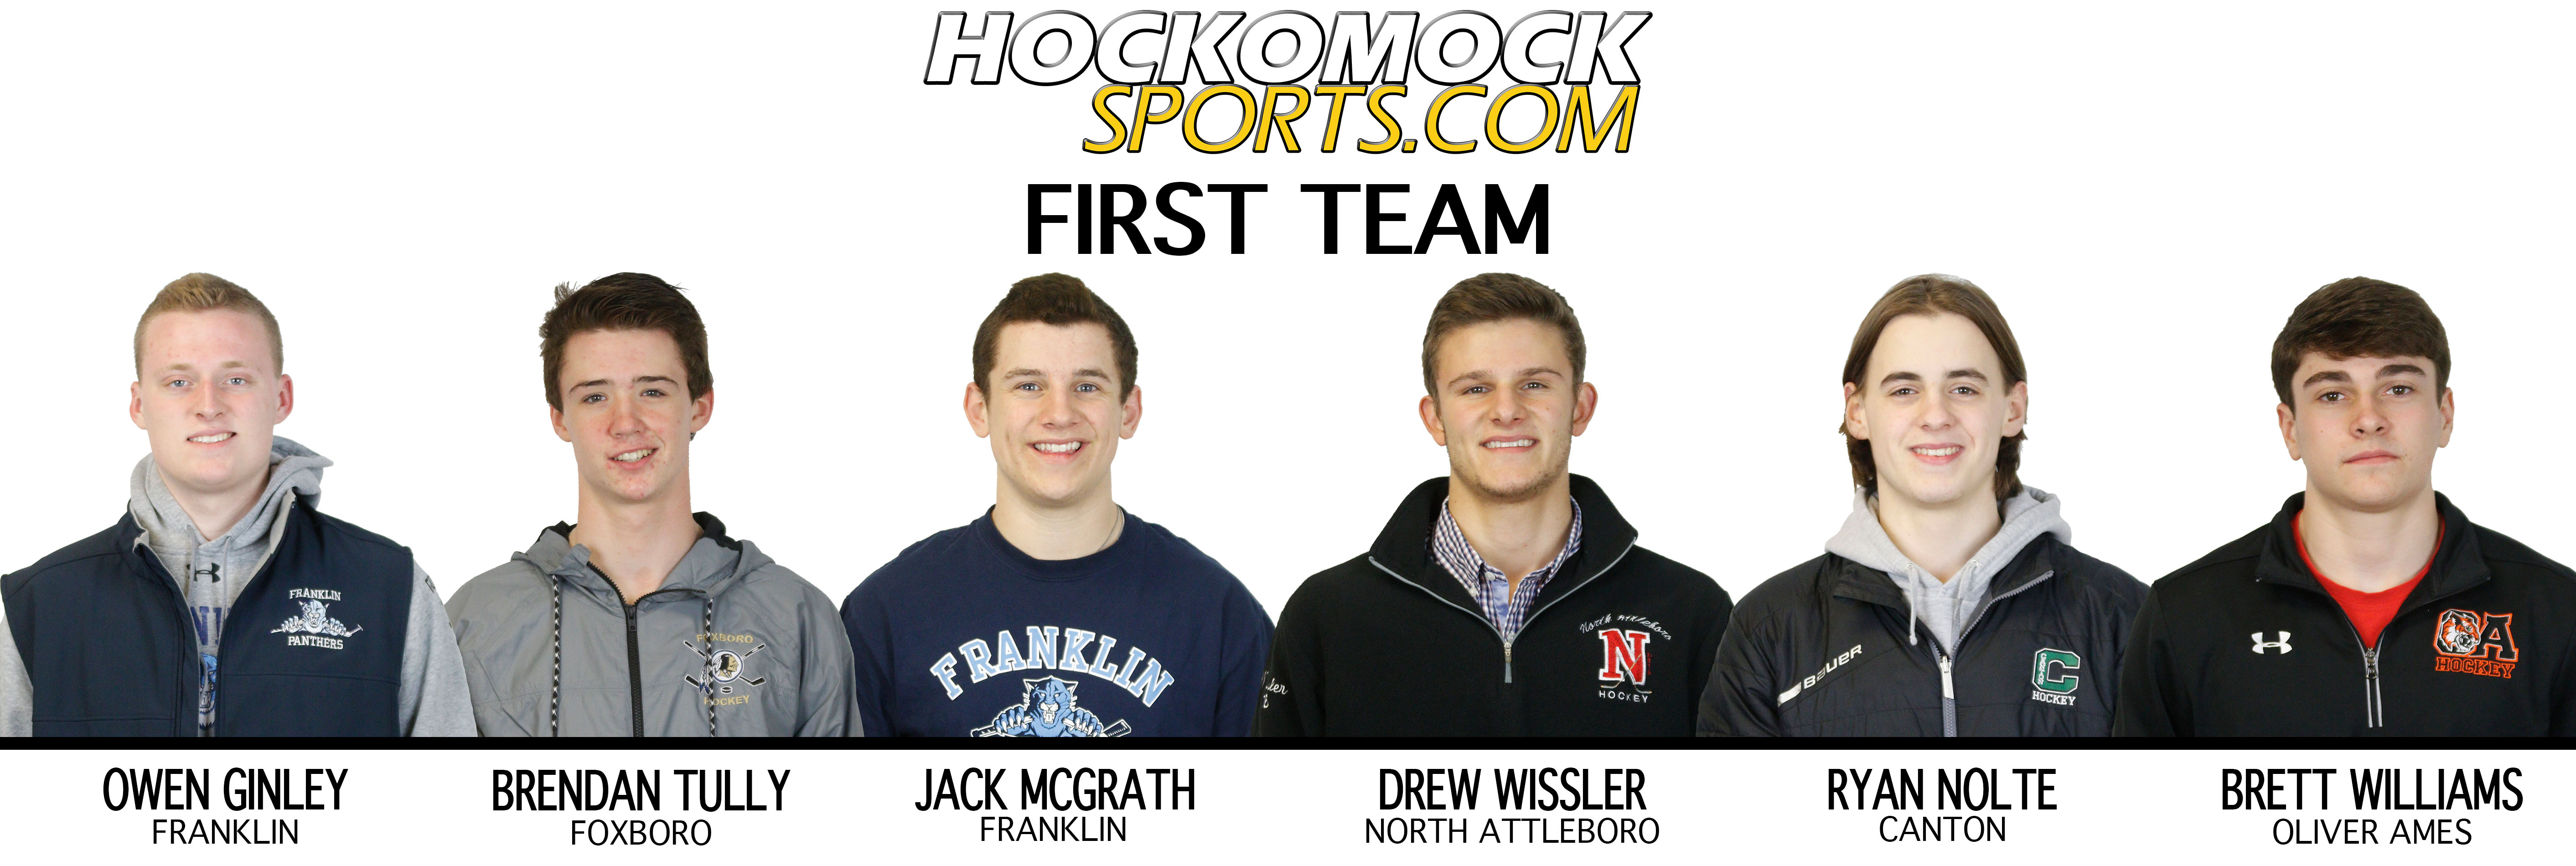 Owen Ginley and Jack McGrath, Franklin were recognized on the First Team